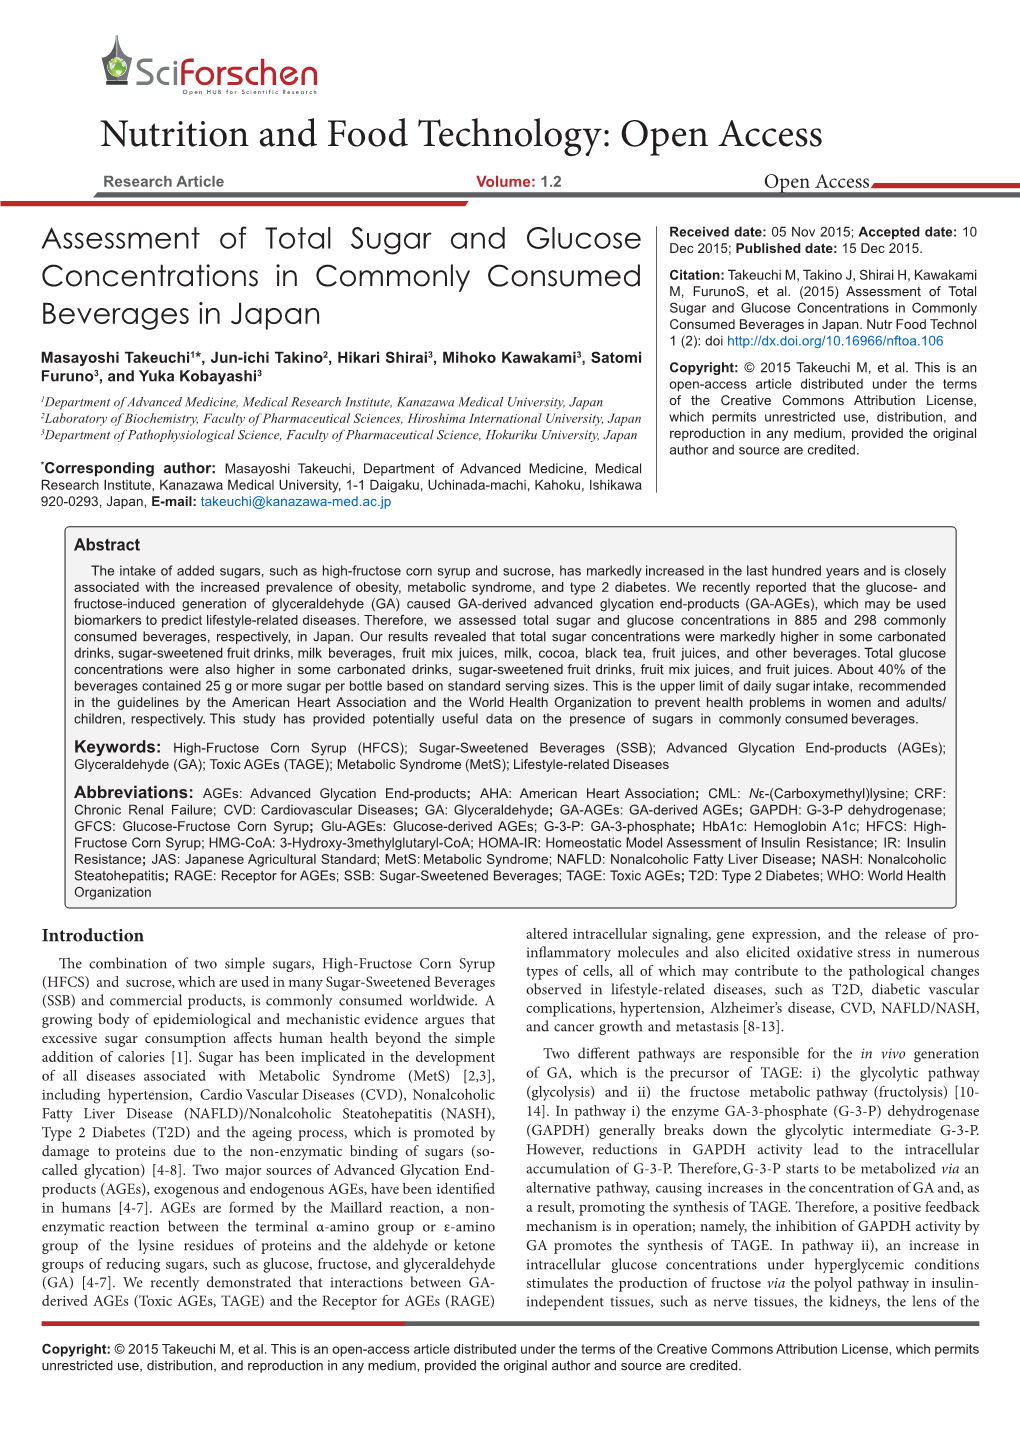 Assessment of Total Sugar and Glucoseconcentrations In